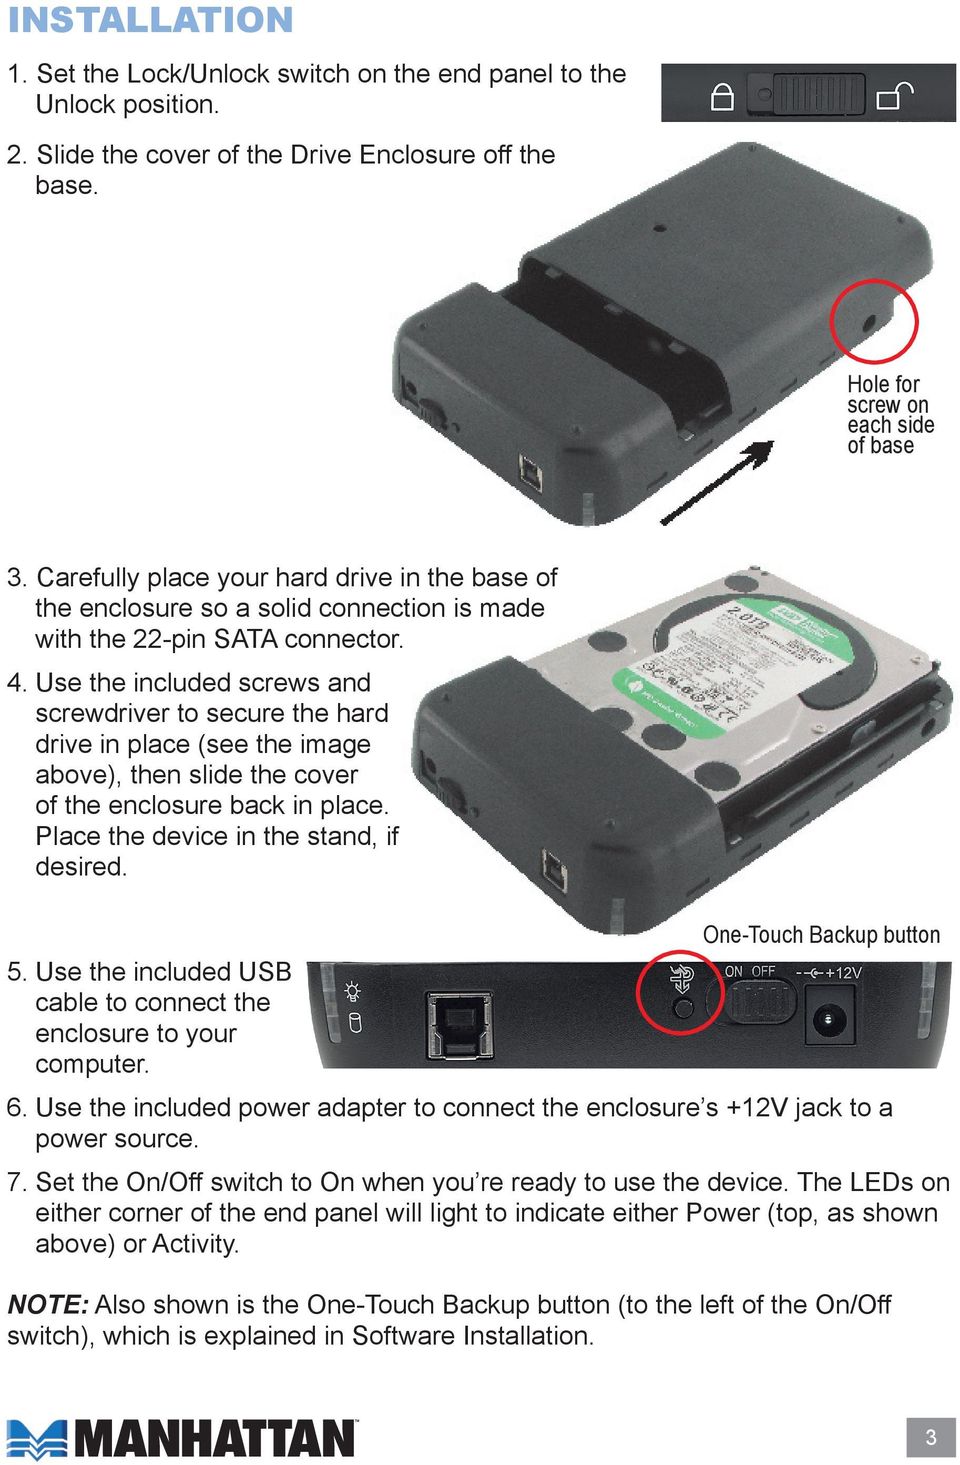 Use the included screws and screwdriver to secure the hard drive in place (see the image above), then slide the cover of the enclosure back in place. Place the device in the stand, if desired.